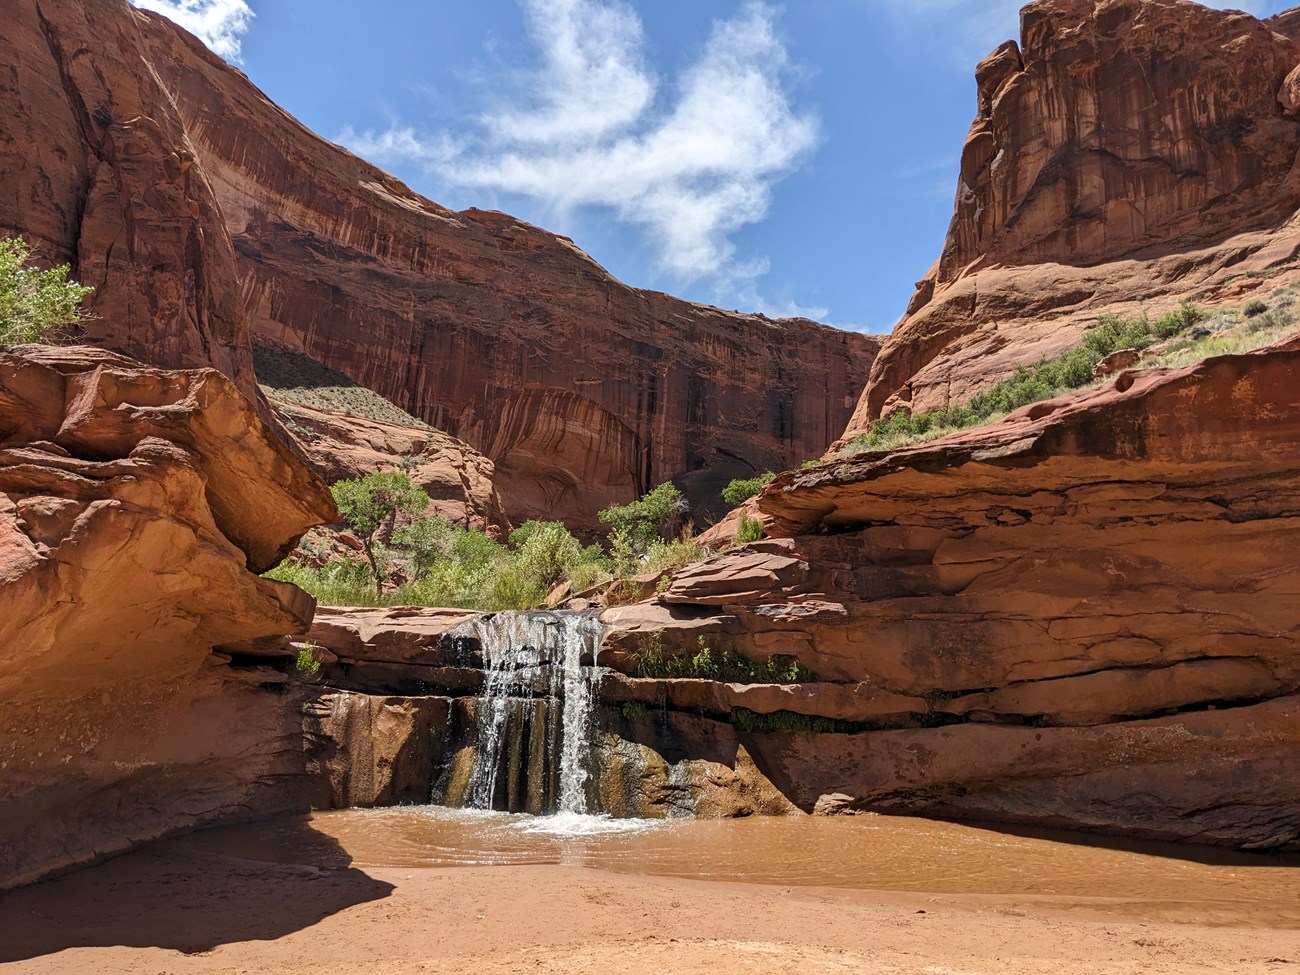 A sandstone canyon with lush trees and grasses. A waterfall flows into the river below.